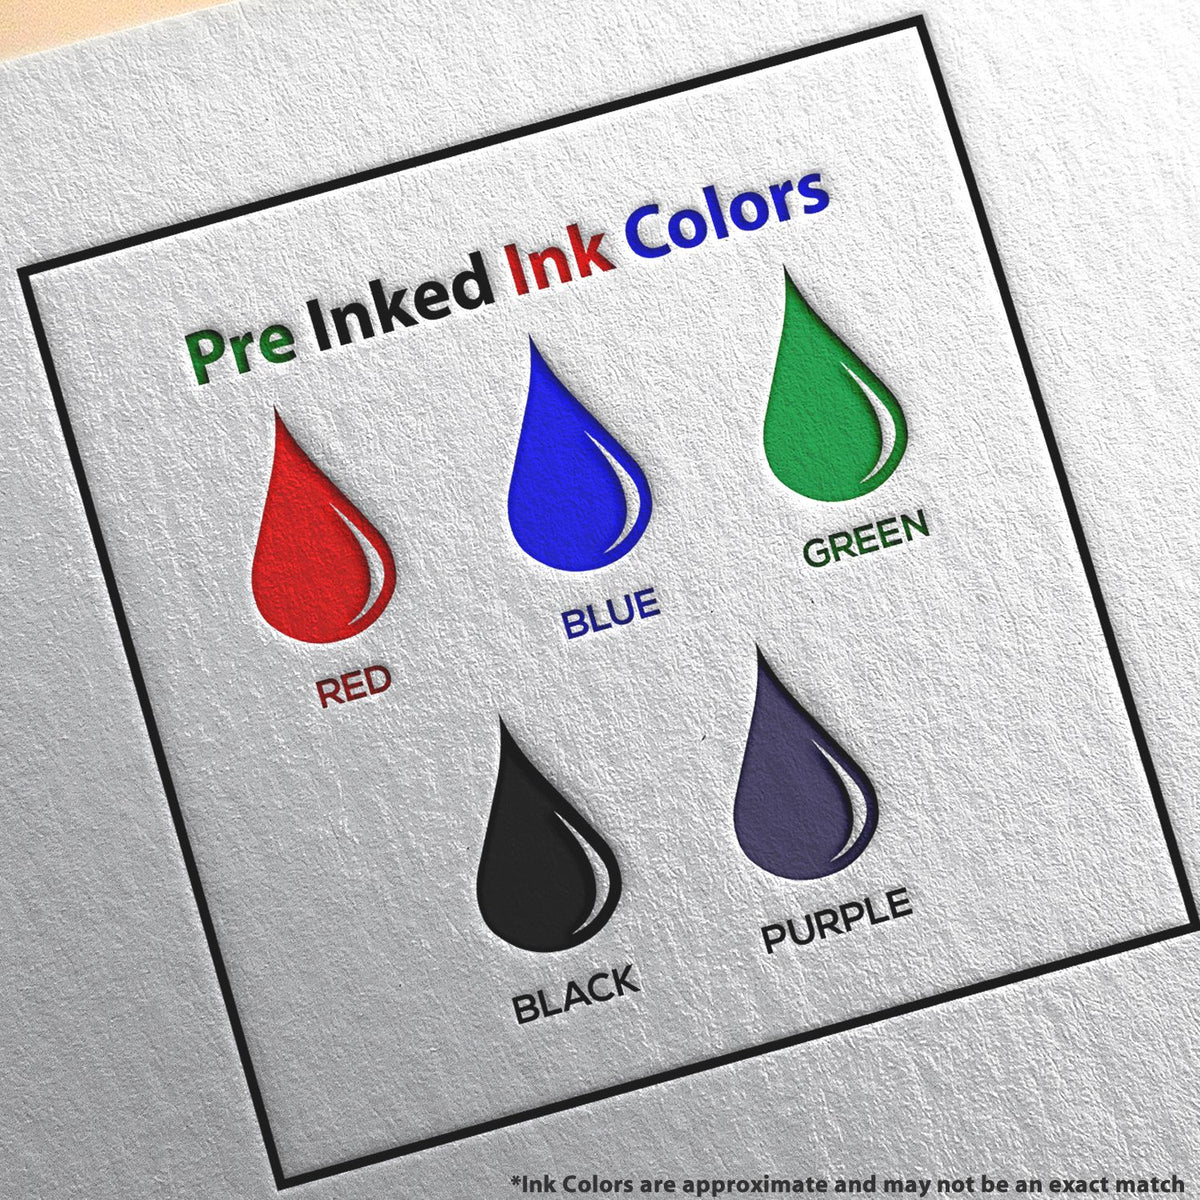 A picture showing the different ink colors or hues available for the Premium MaxLight Pre-Inked Utah Landscape Architectural Stamp product.